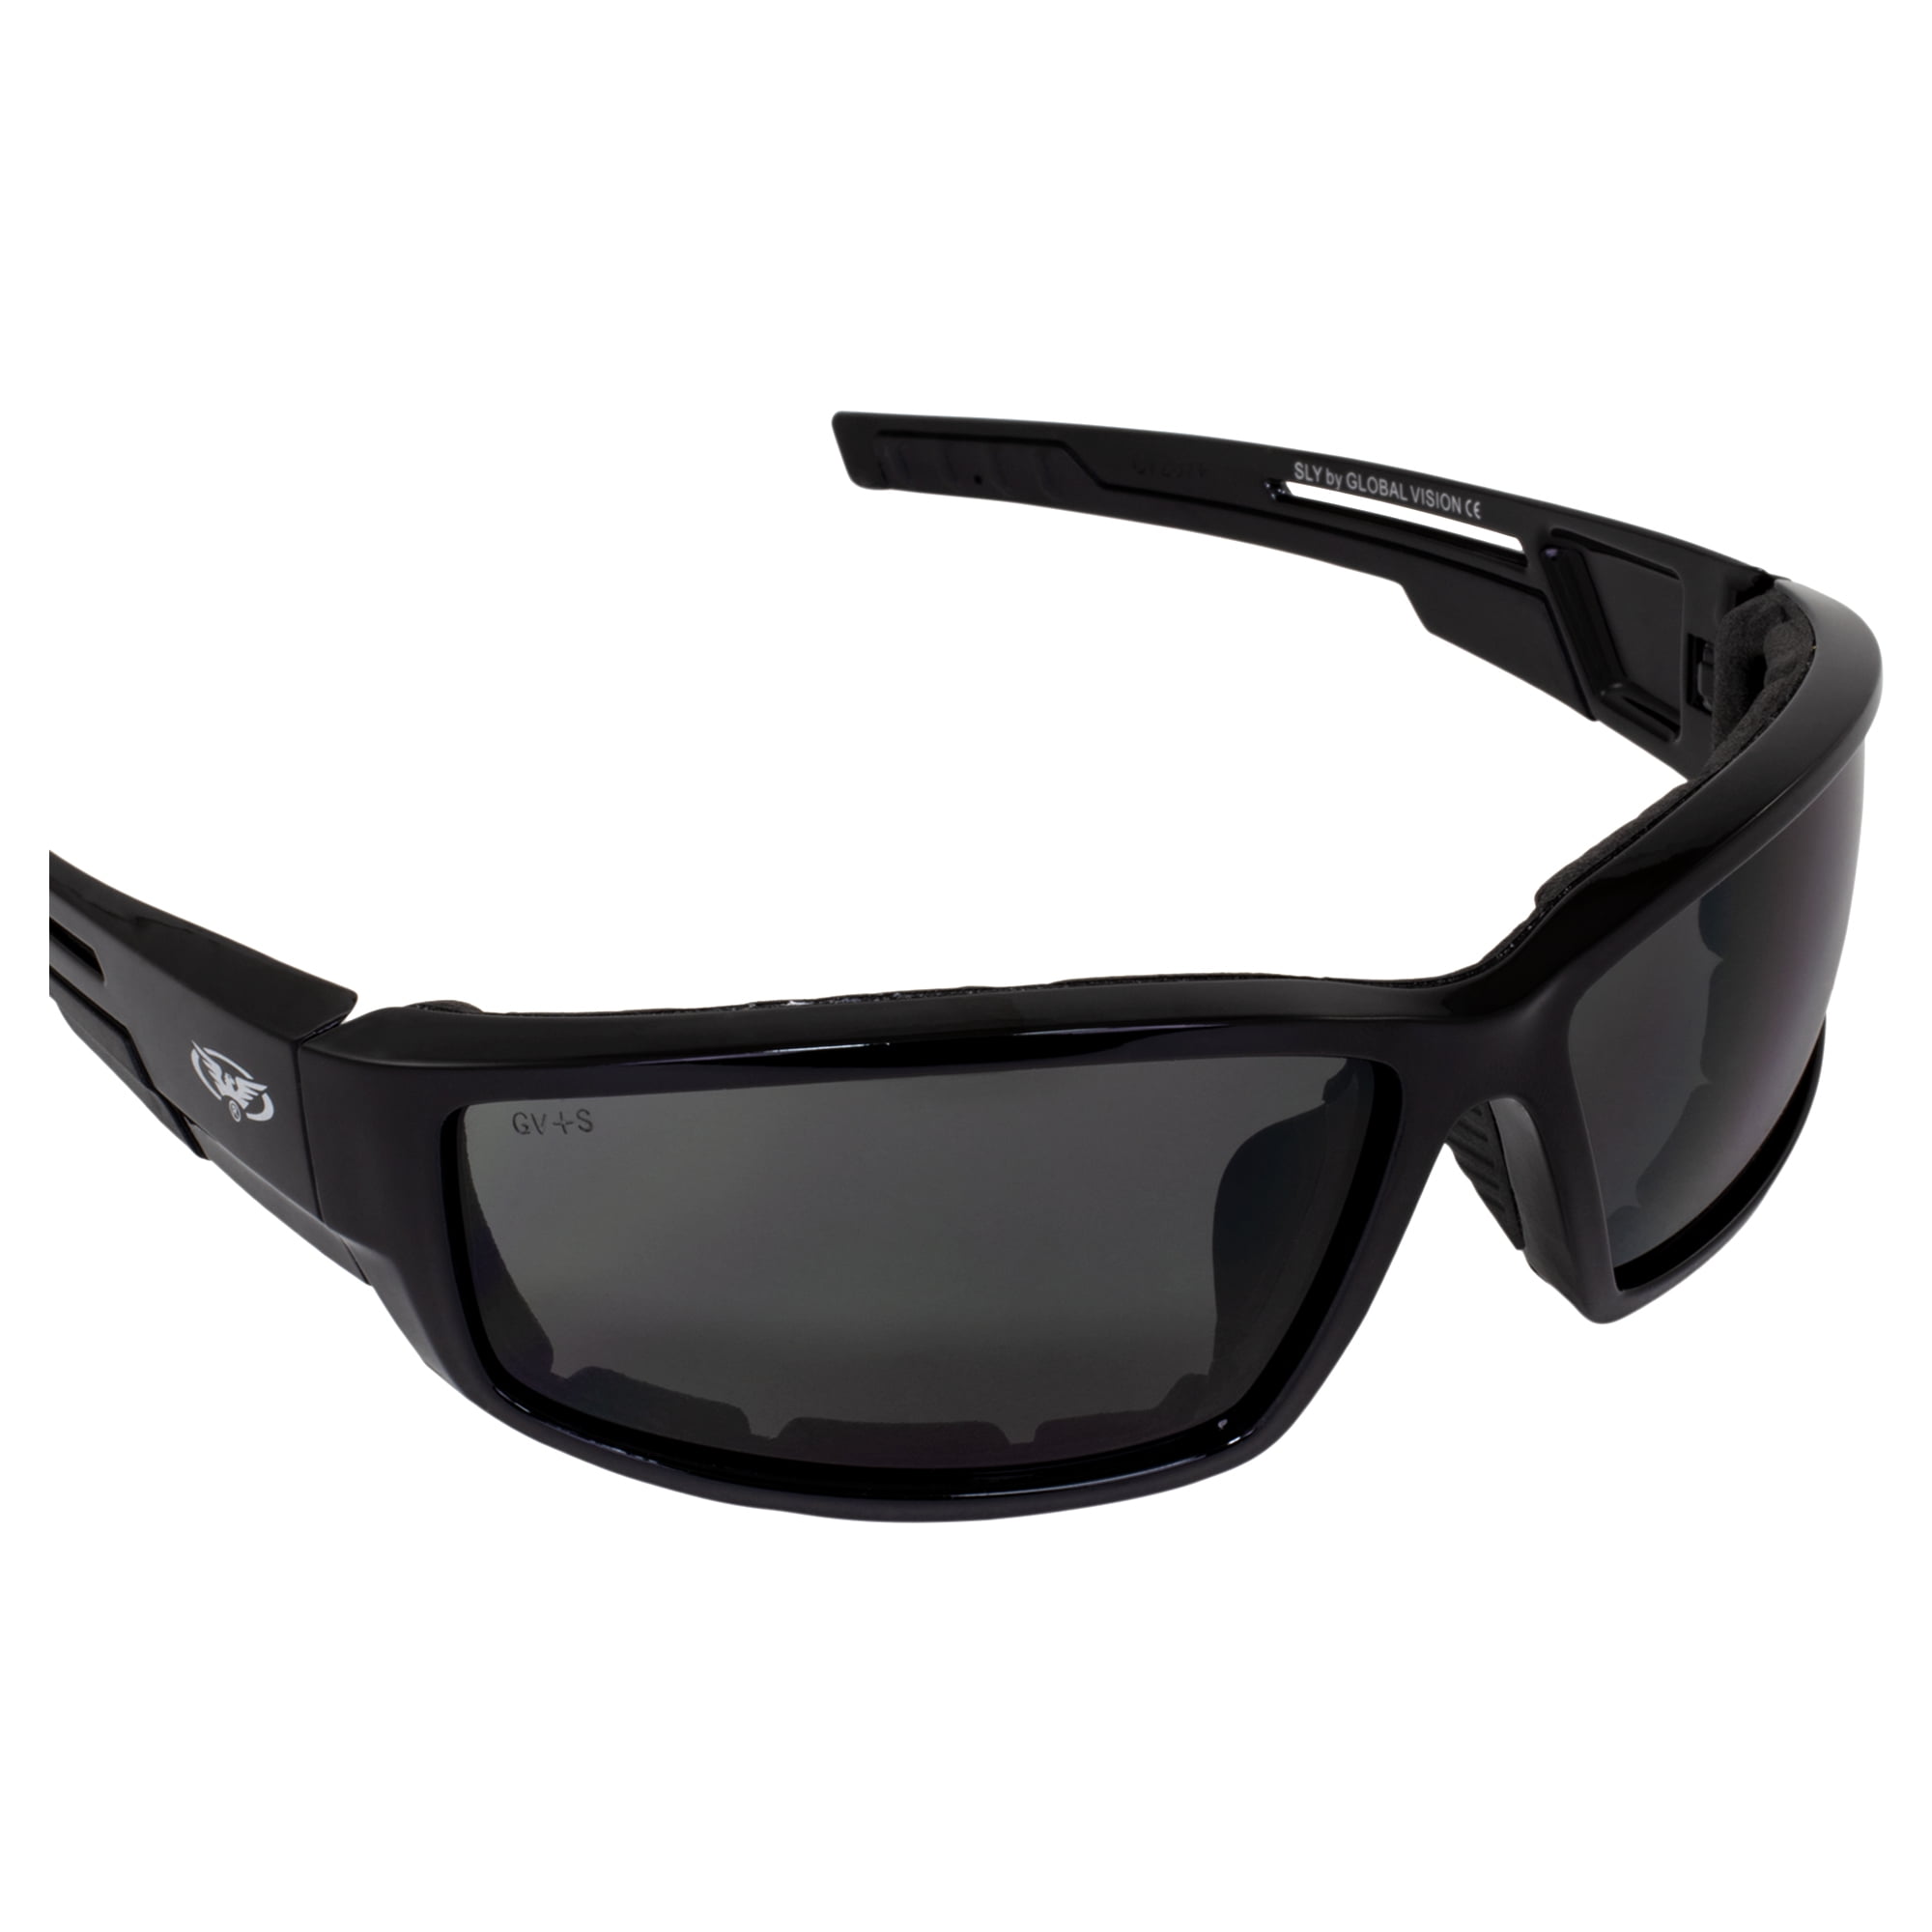 Global Vision Sly Padded Motorcycle Sunglasses Black Frames Dual-Injected Rubber on Temples Clear Lenses 